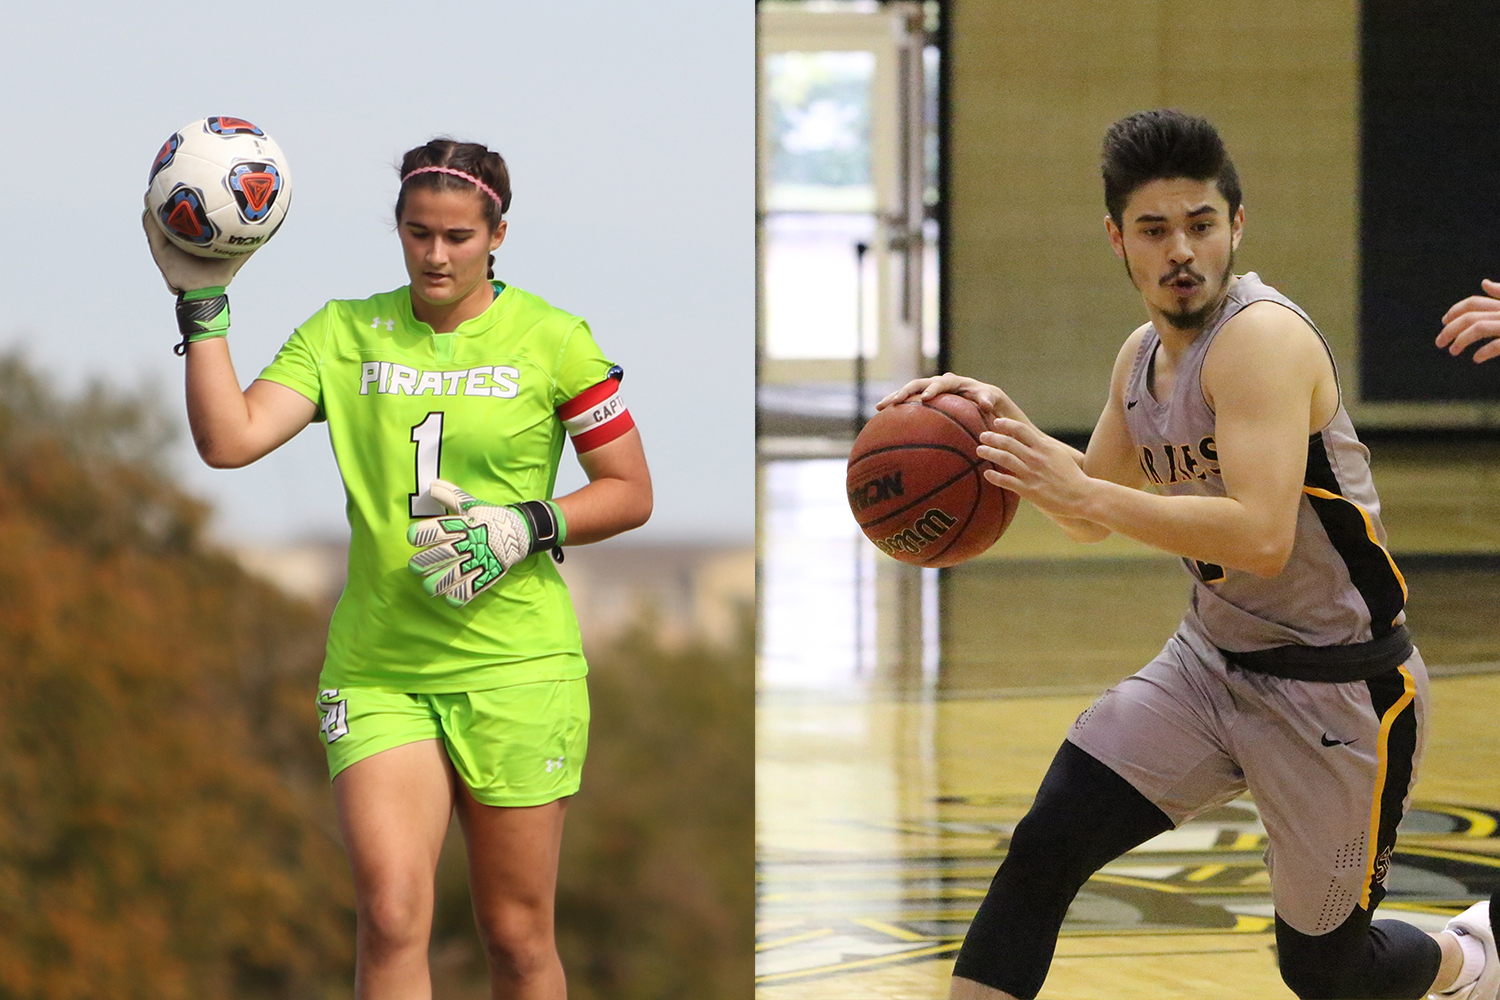 Left: Women's soccer goalie Mary Cardone prepares to bounce the soccer ball in preparation to punt the ball. 

Right: Men's basketball player Justin McCormack dribbles the ball. 